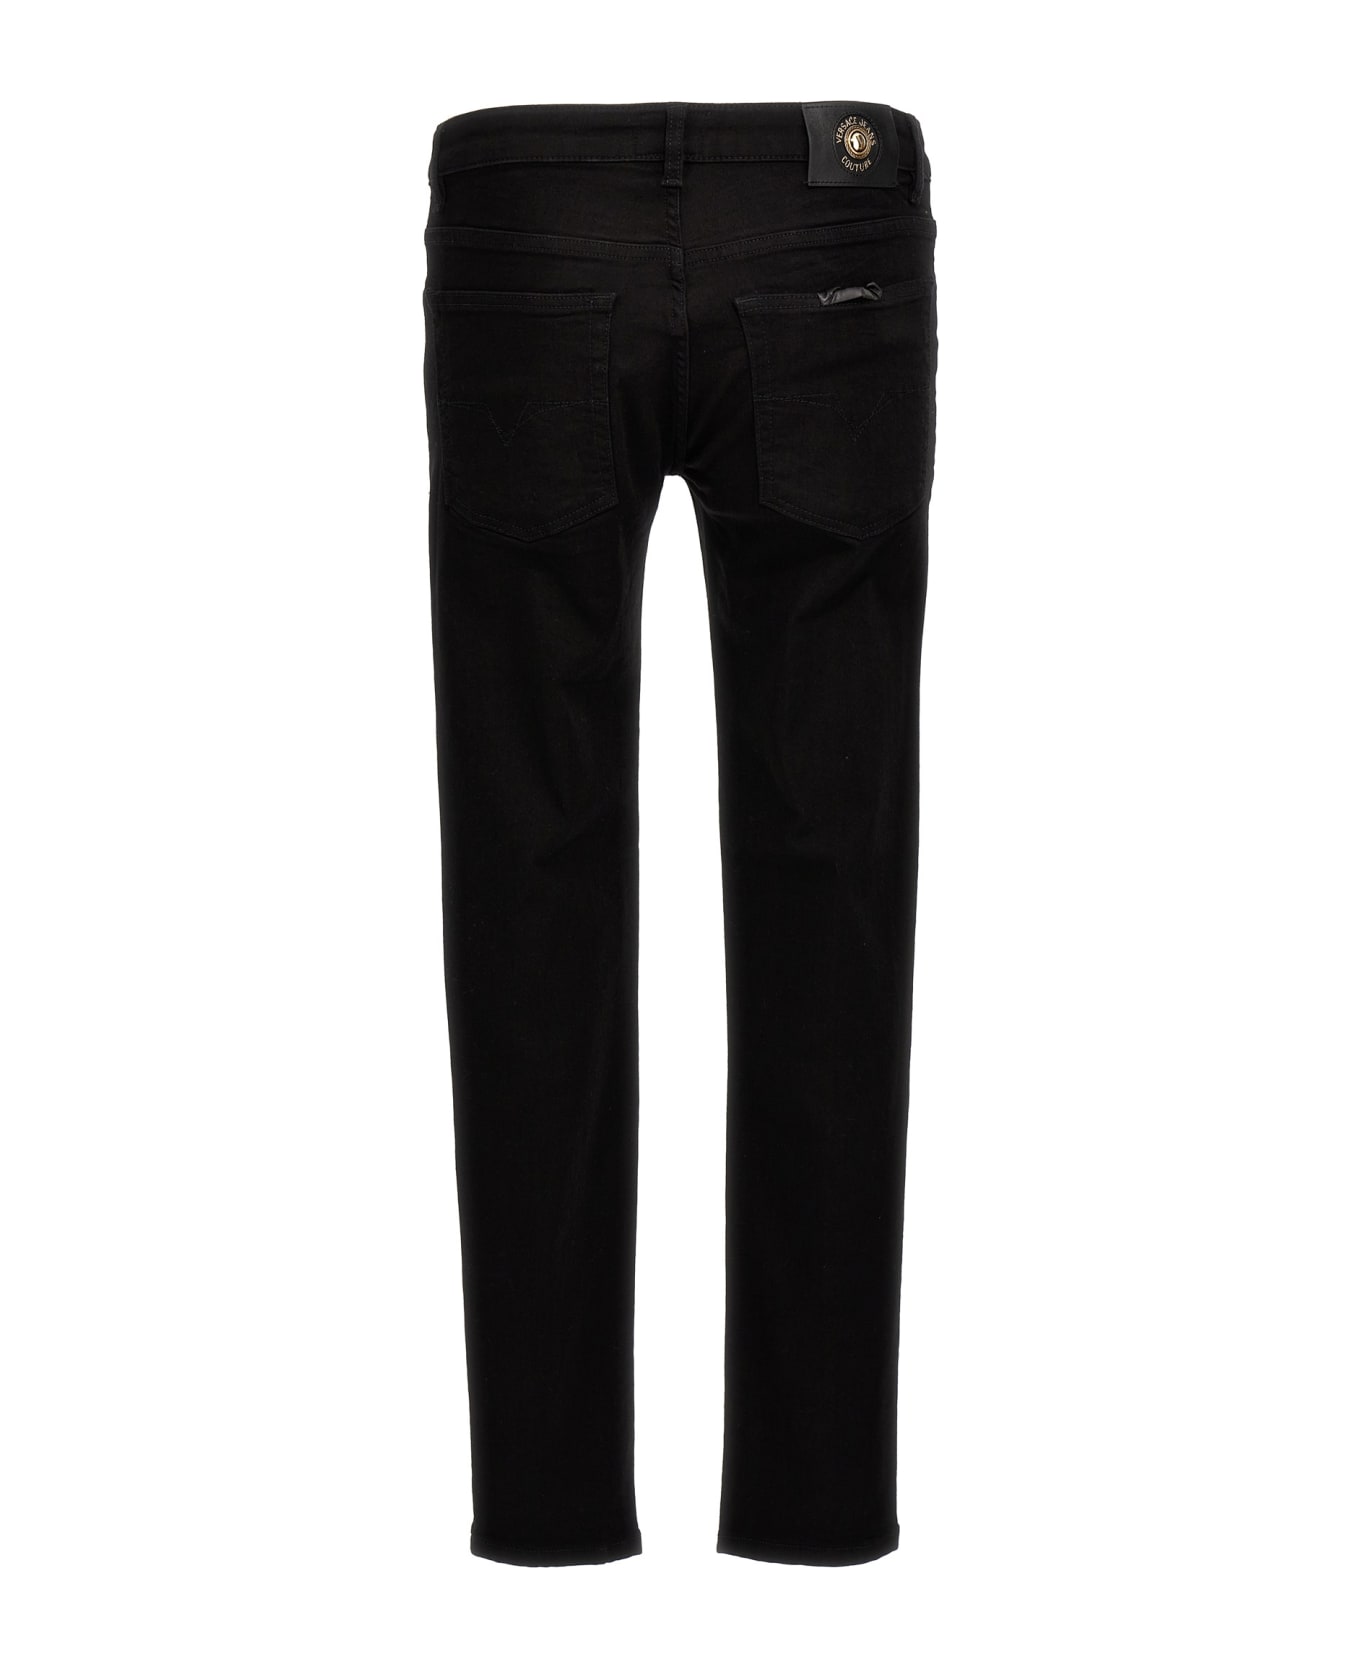 Versace Jeans Couture Skinny Jeans - black デニム